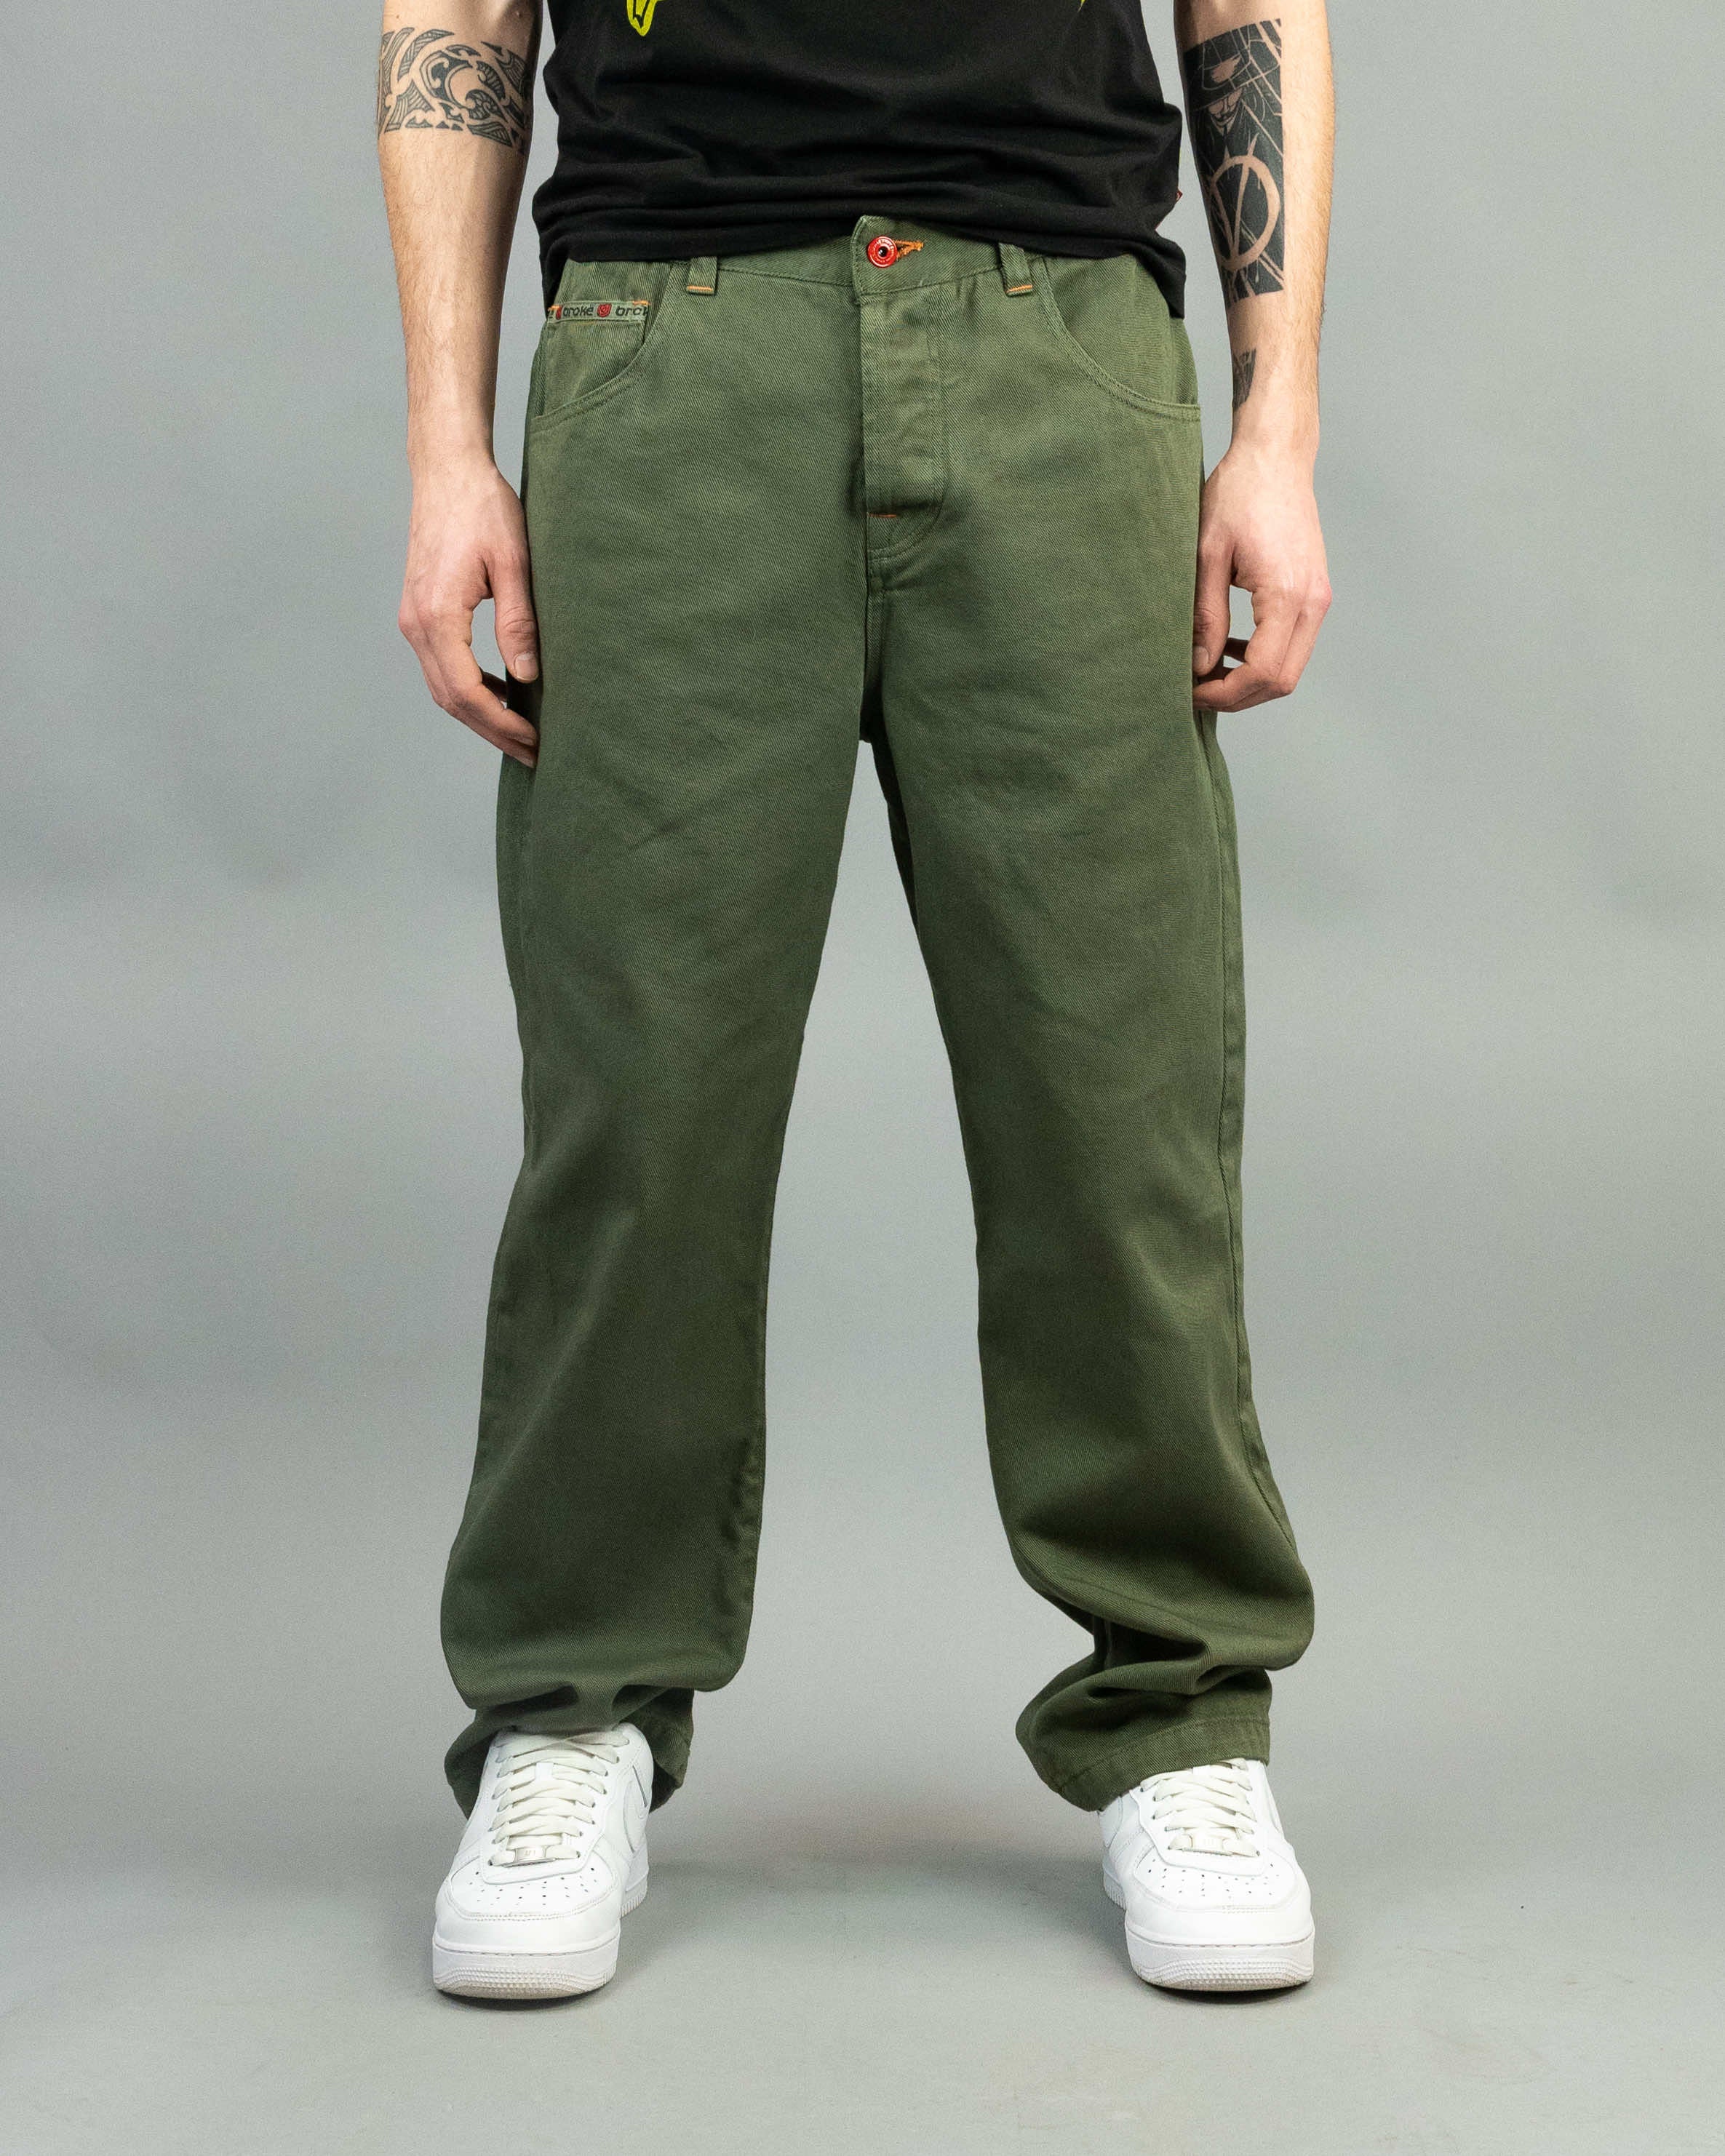 DRILL SALE ARMY GREEN - Pants